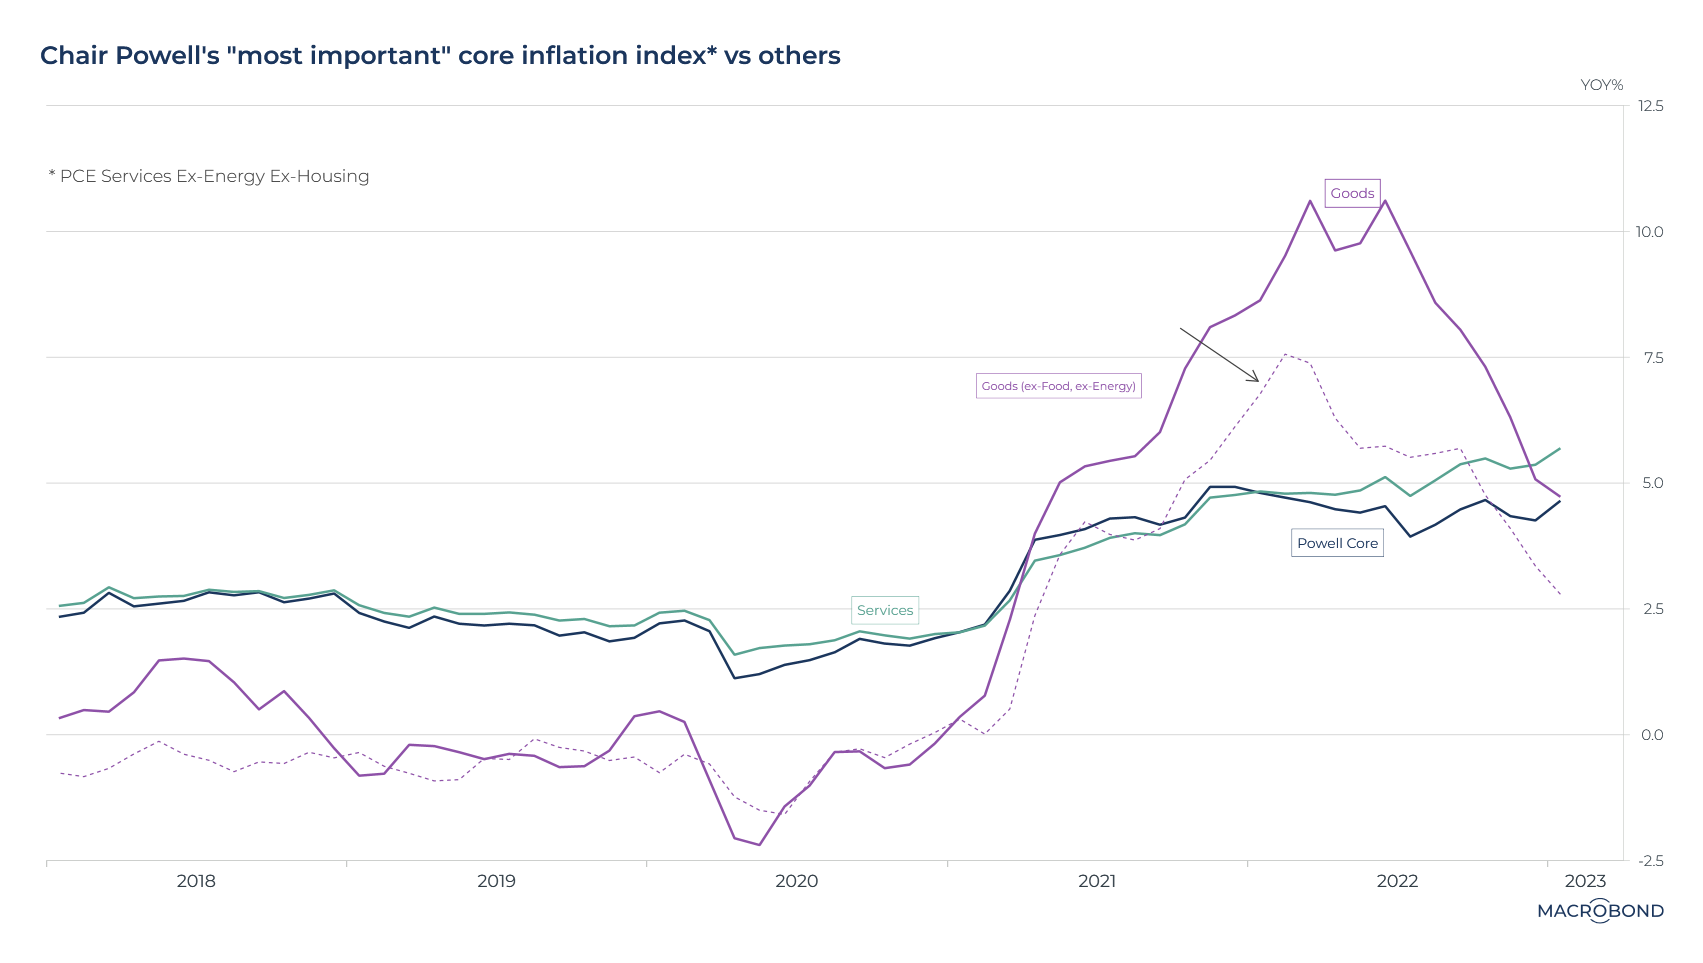 "Powell’s “Most Important” Core Inflation Index vs Goods and Services inflation"